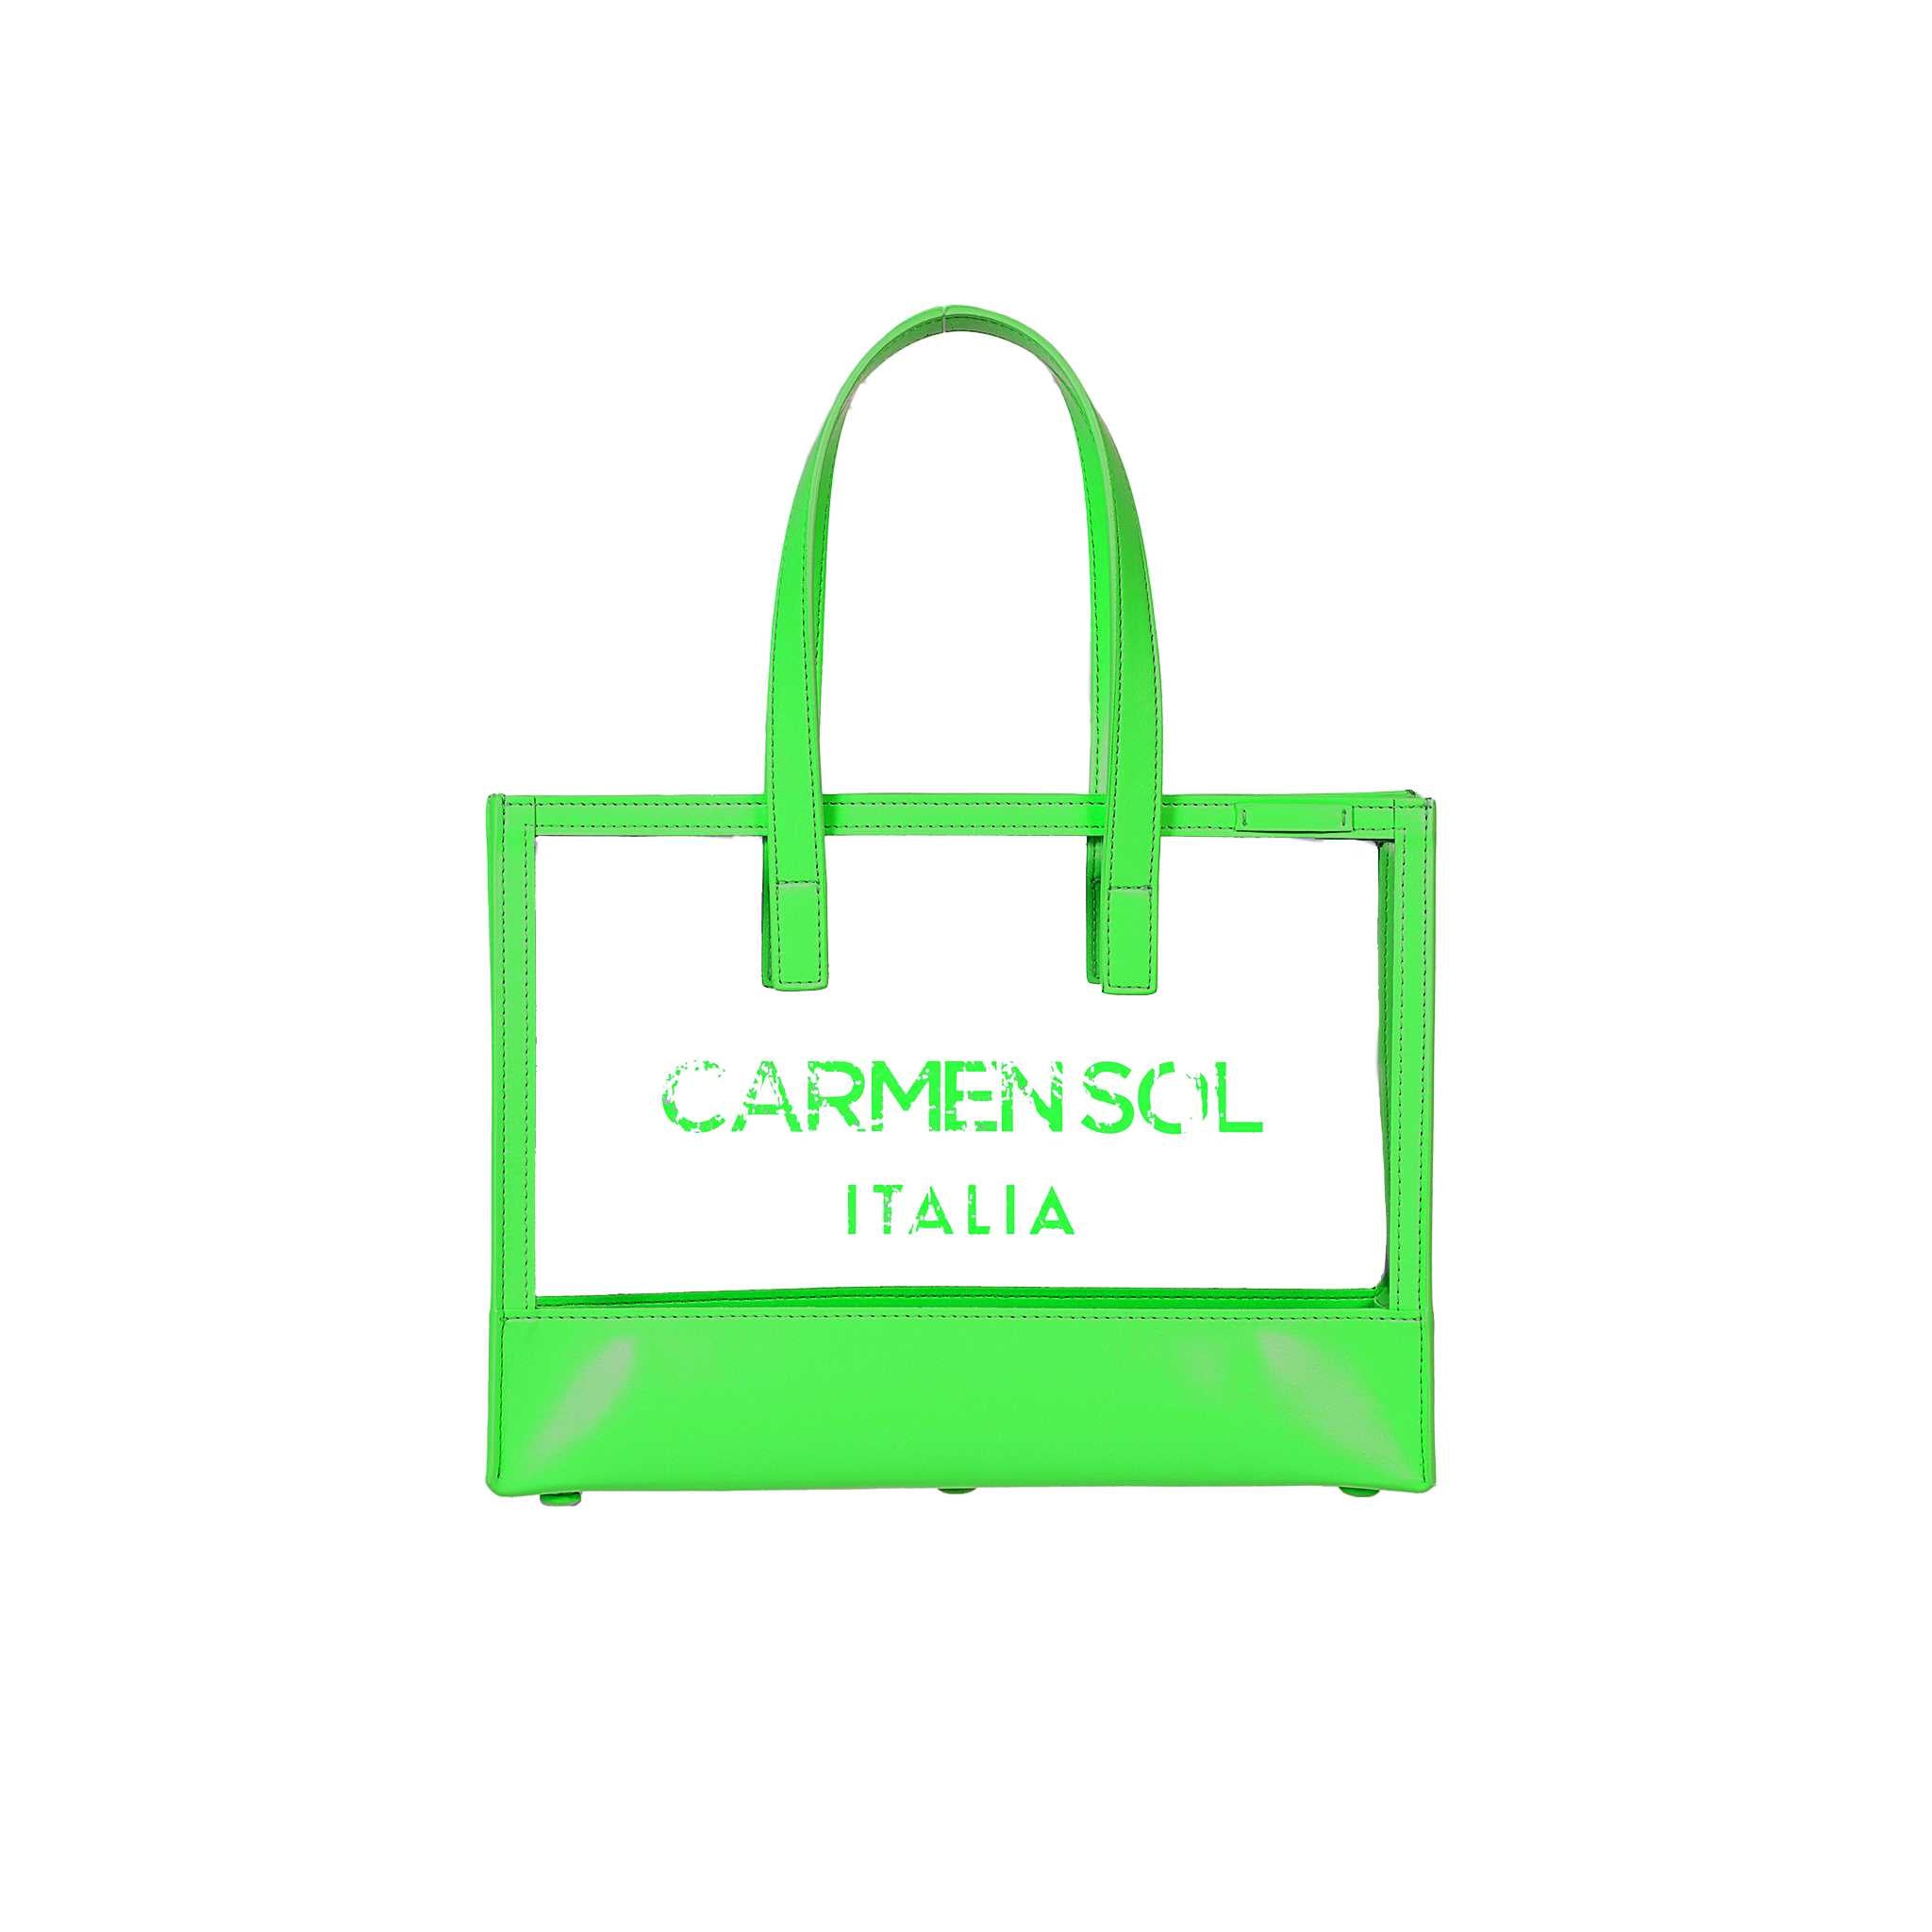 Green Neon Small Jelly Bag